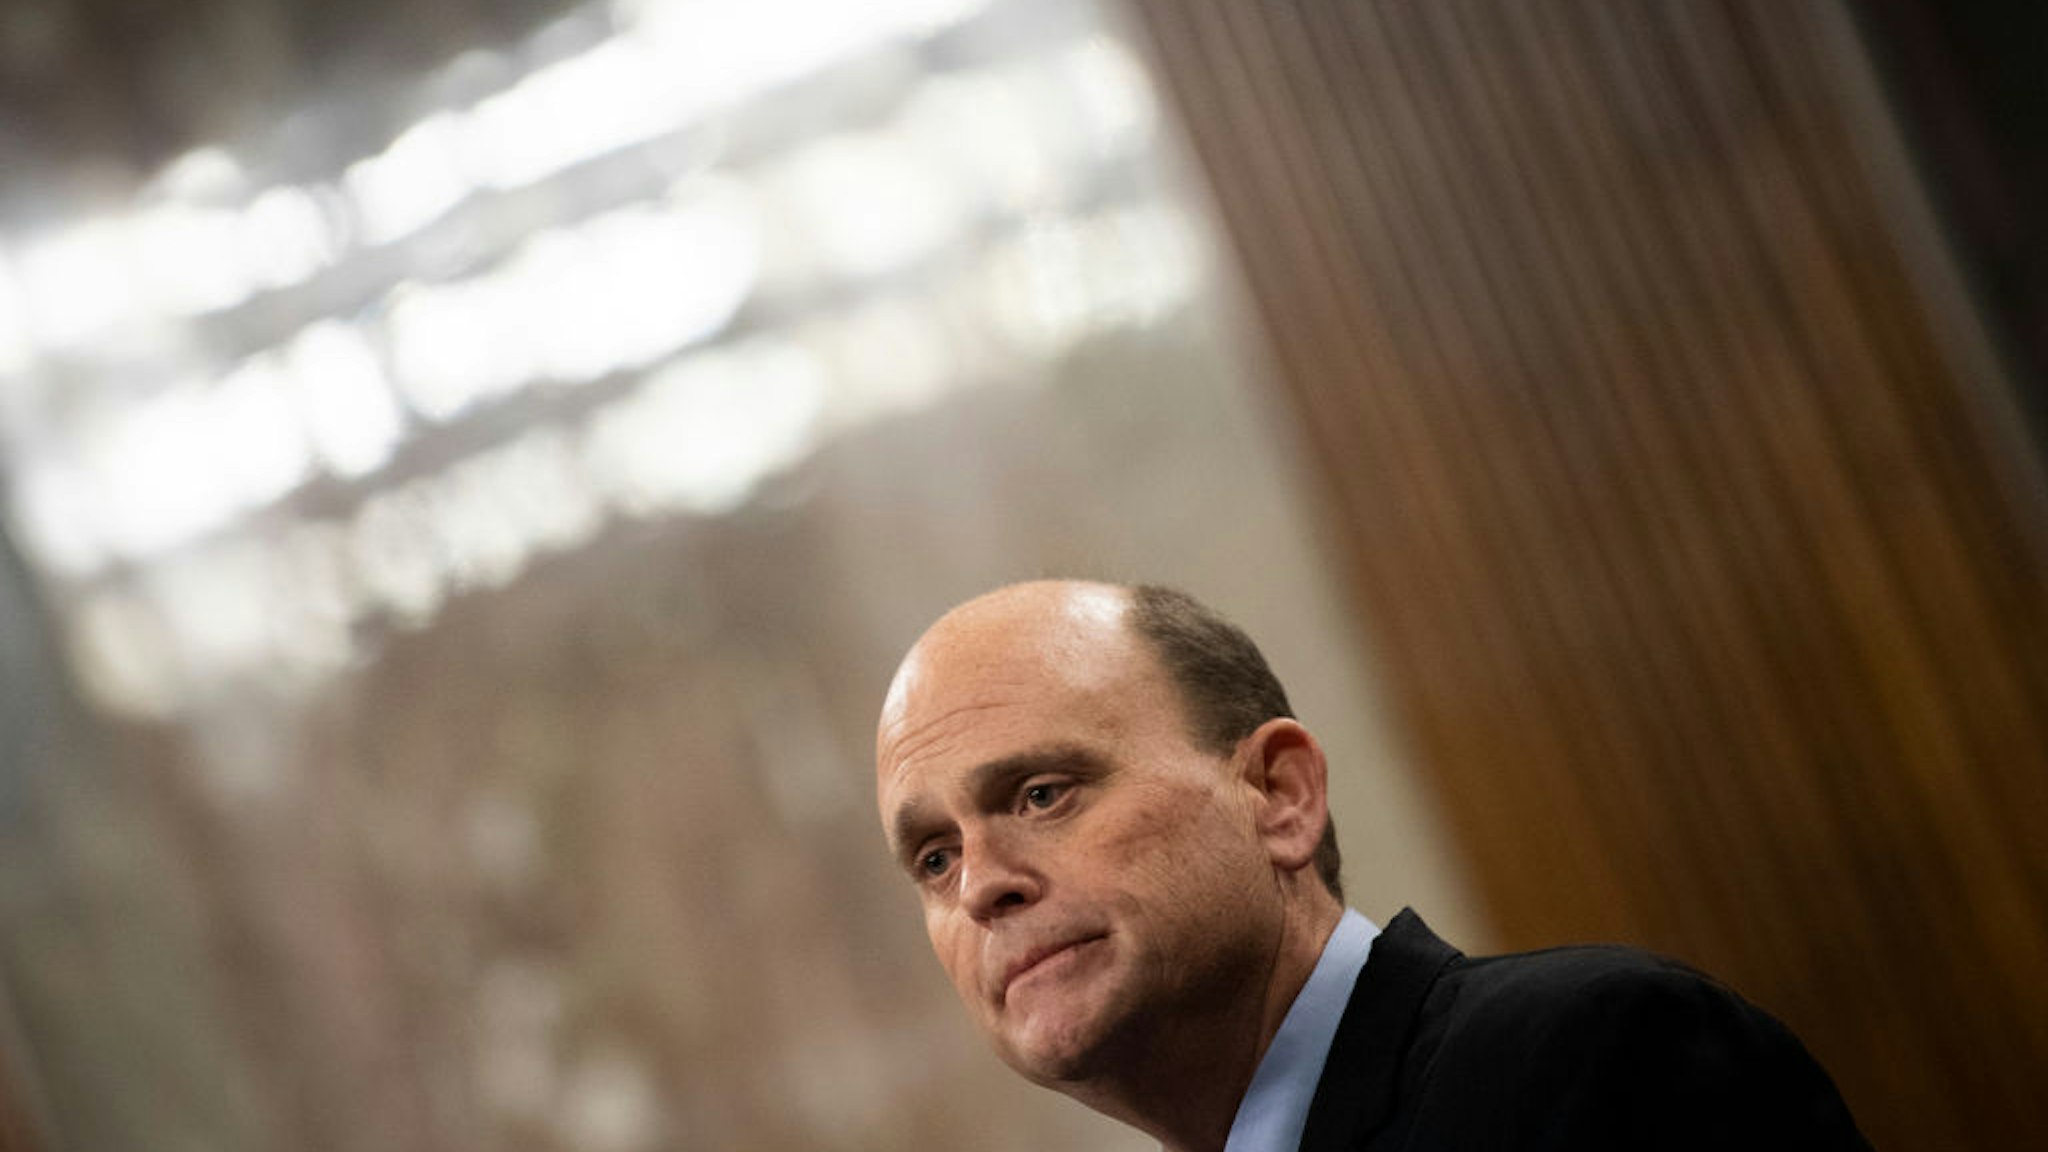 UNITED STATES - December 14: Rep. Tom Reed, R-N.Y., attends a news conference with a group of bipartisan lawmakers to unveil a proposal for a COVID-19 relief bill in Washington on Monday, Dec. 14, 2020.